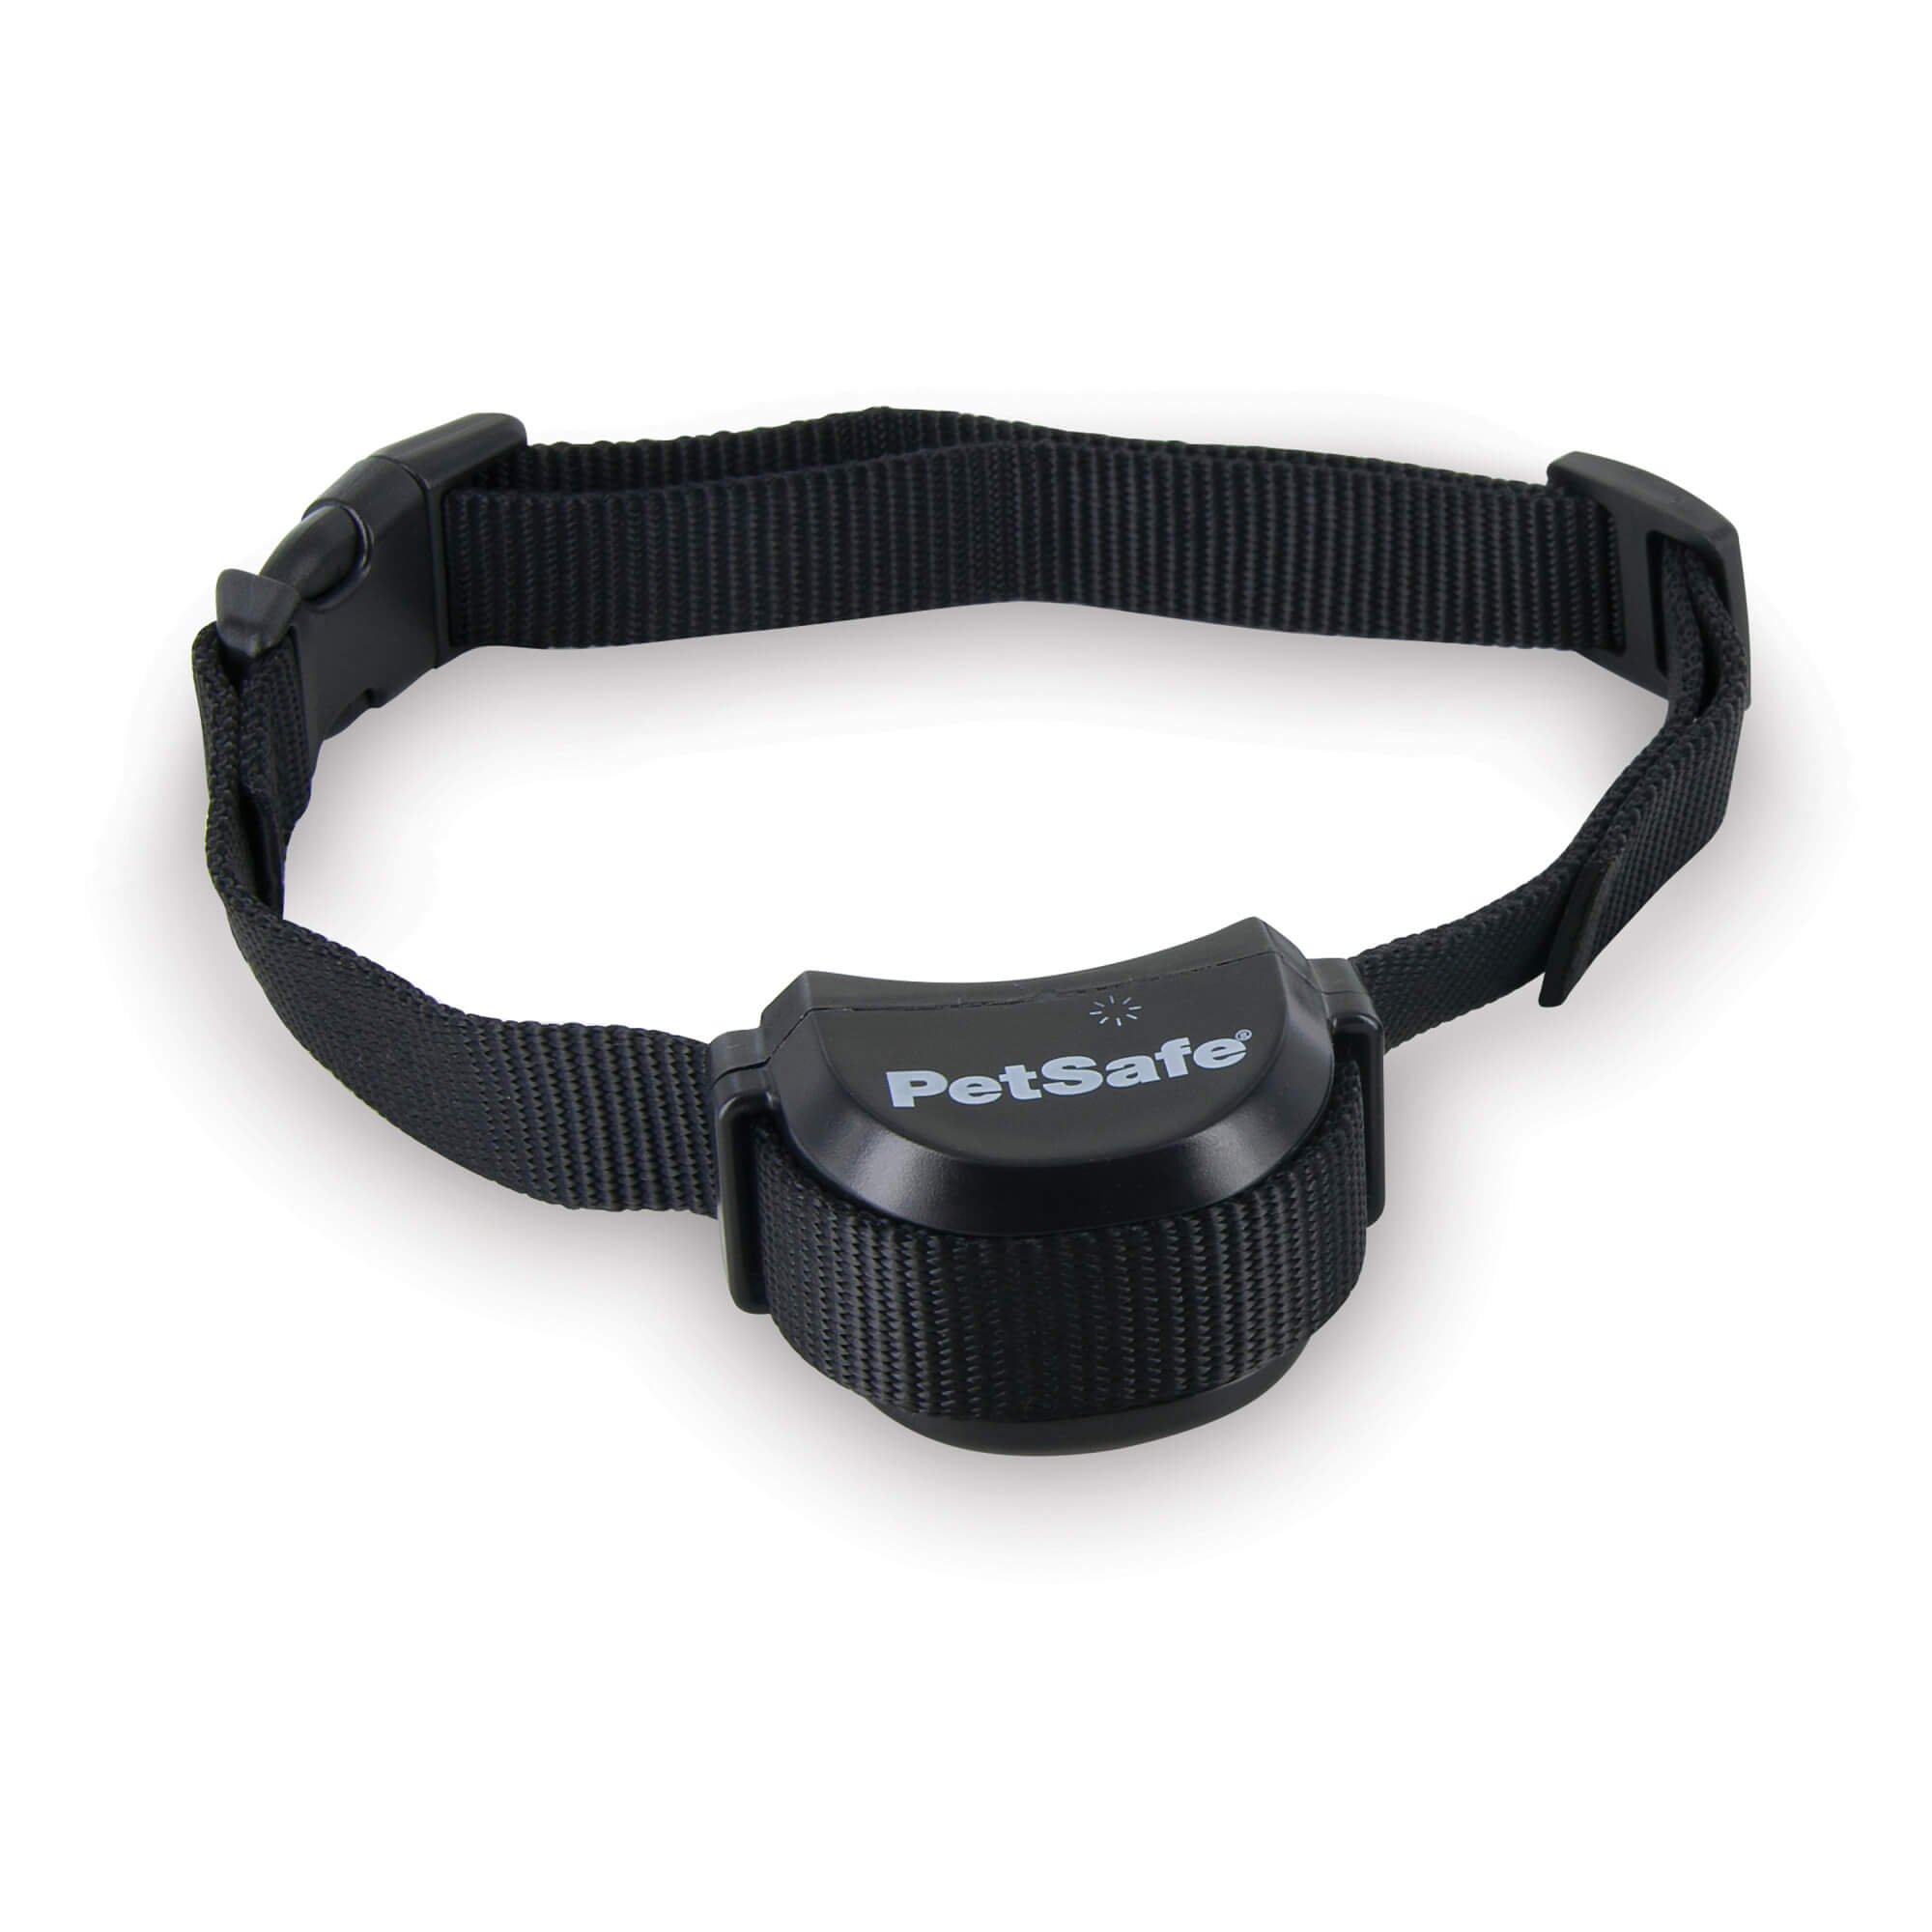 Petsafe dog collar - rechargable wireless stay and play collar